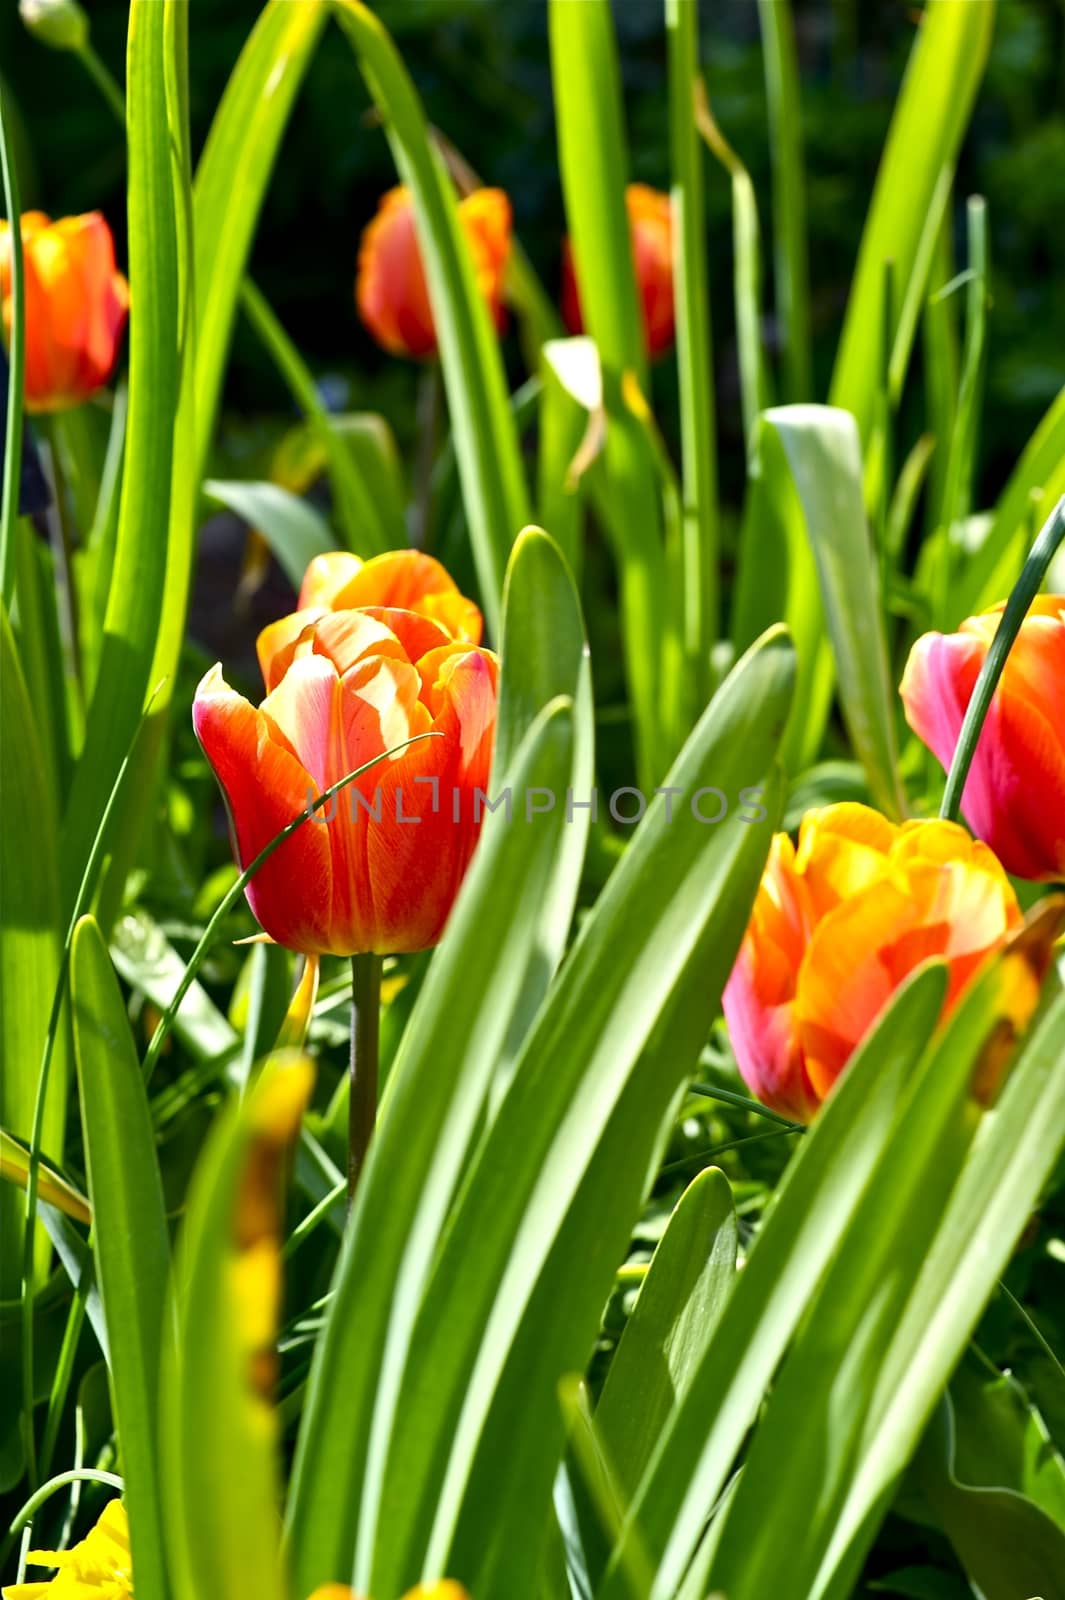 Red-Orange Tulips in the Garden. Flowers Photo Collection.